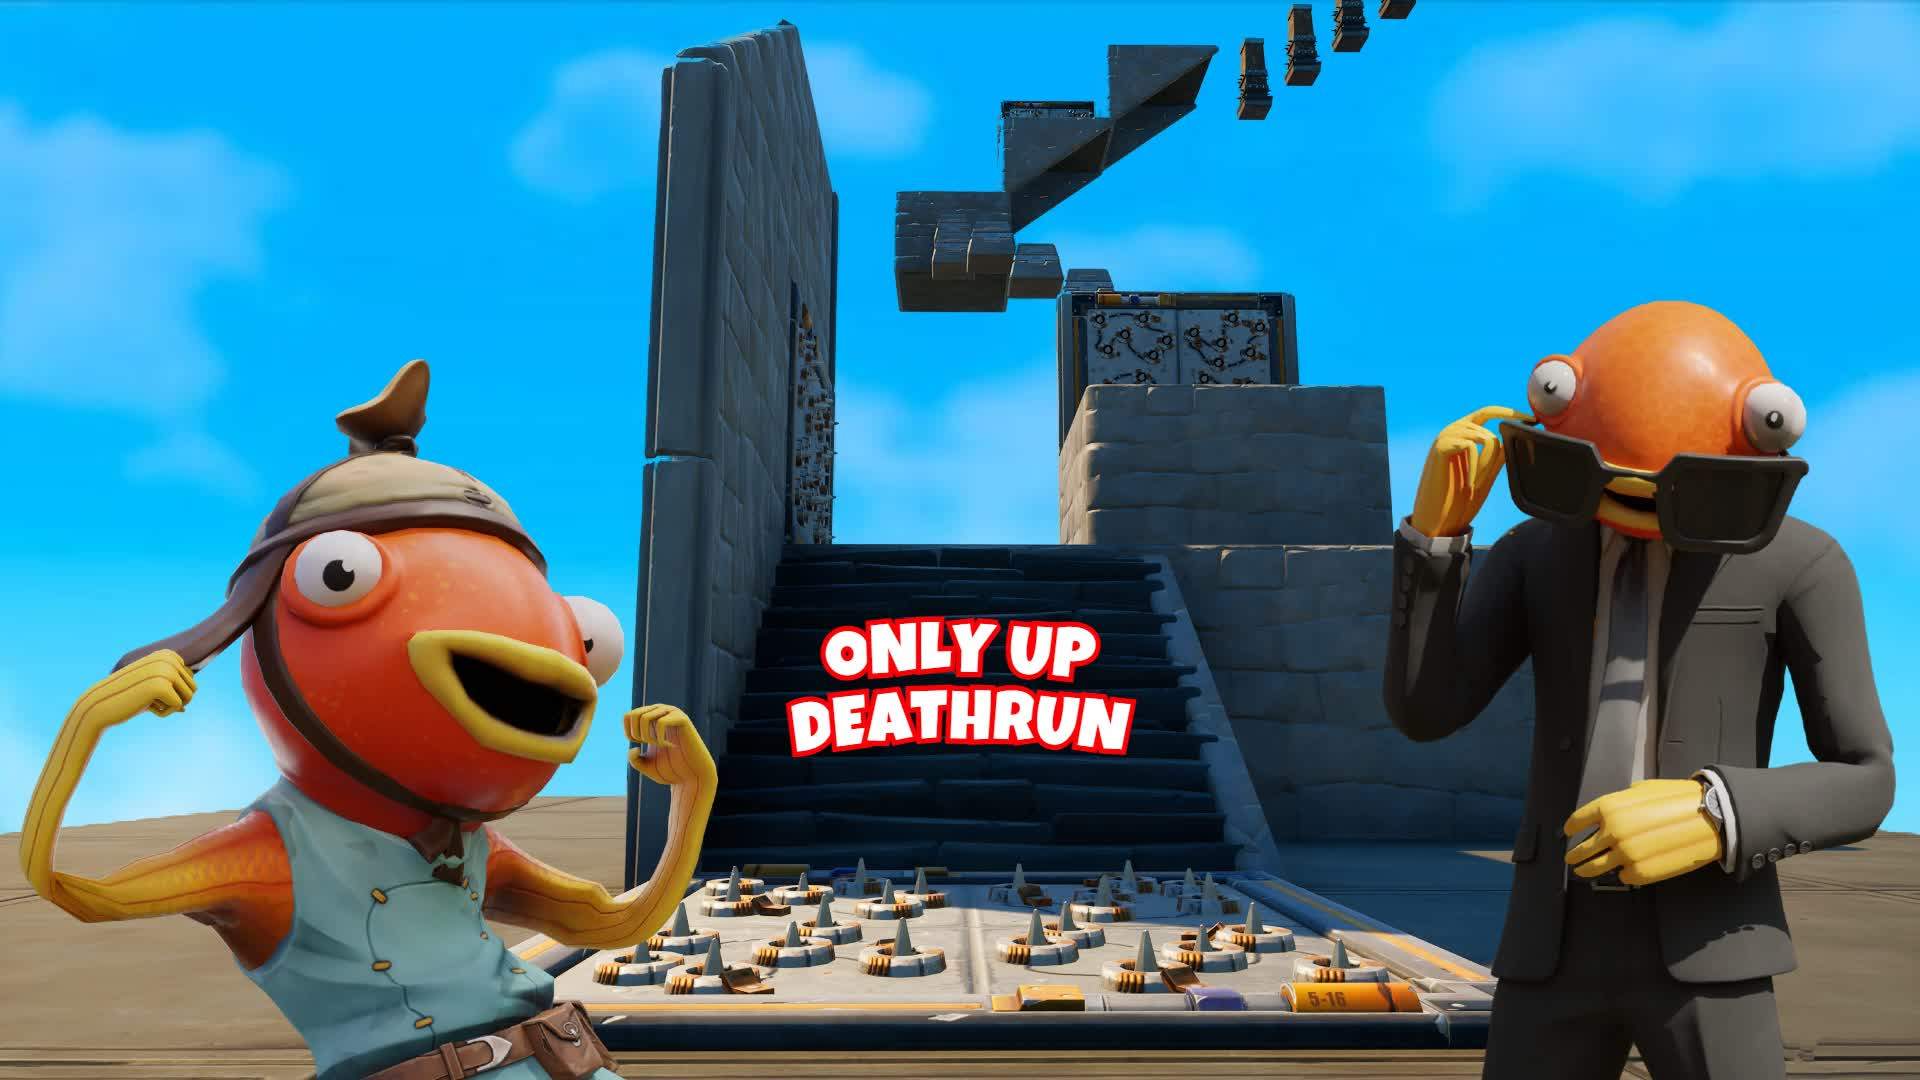 ONLY UP DEATHRUN BY [EMG]